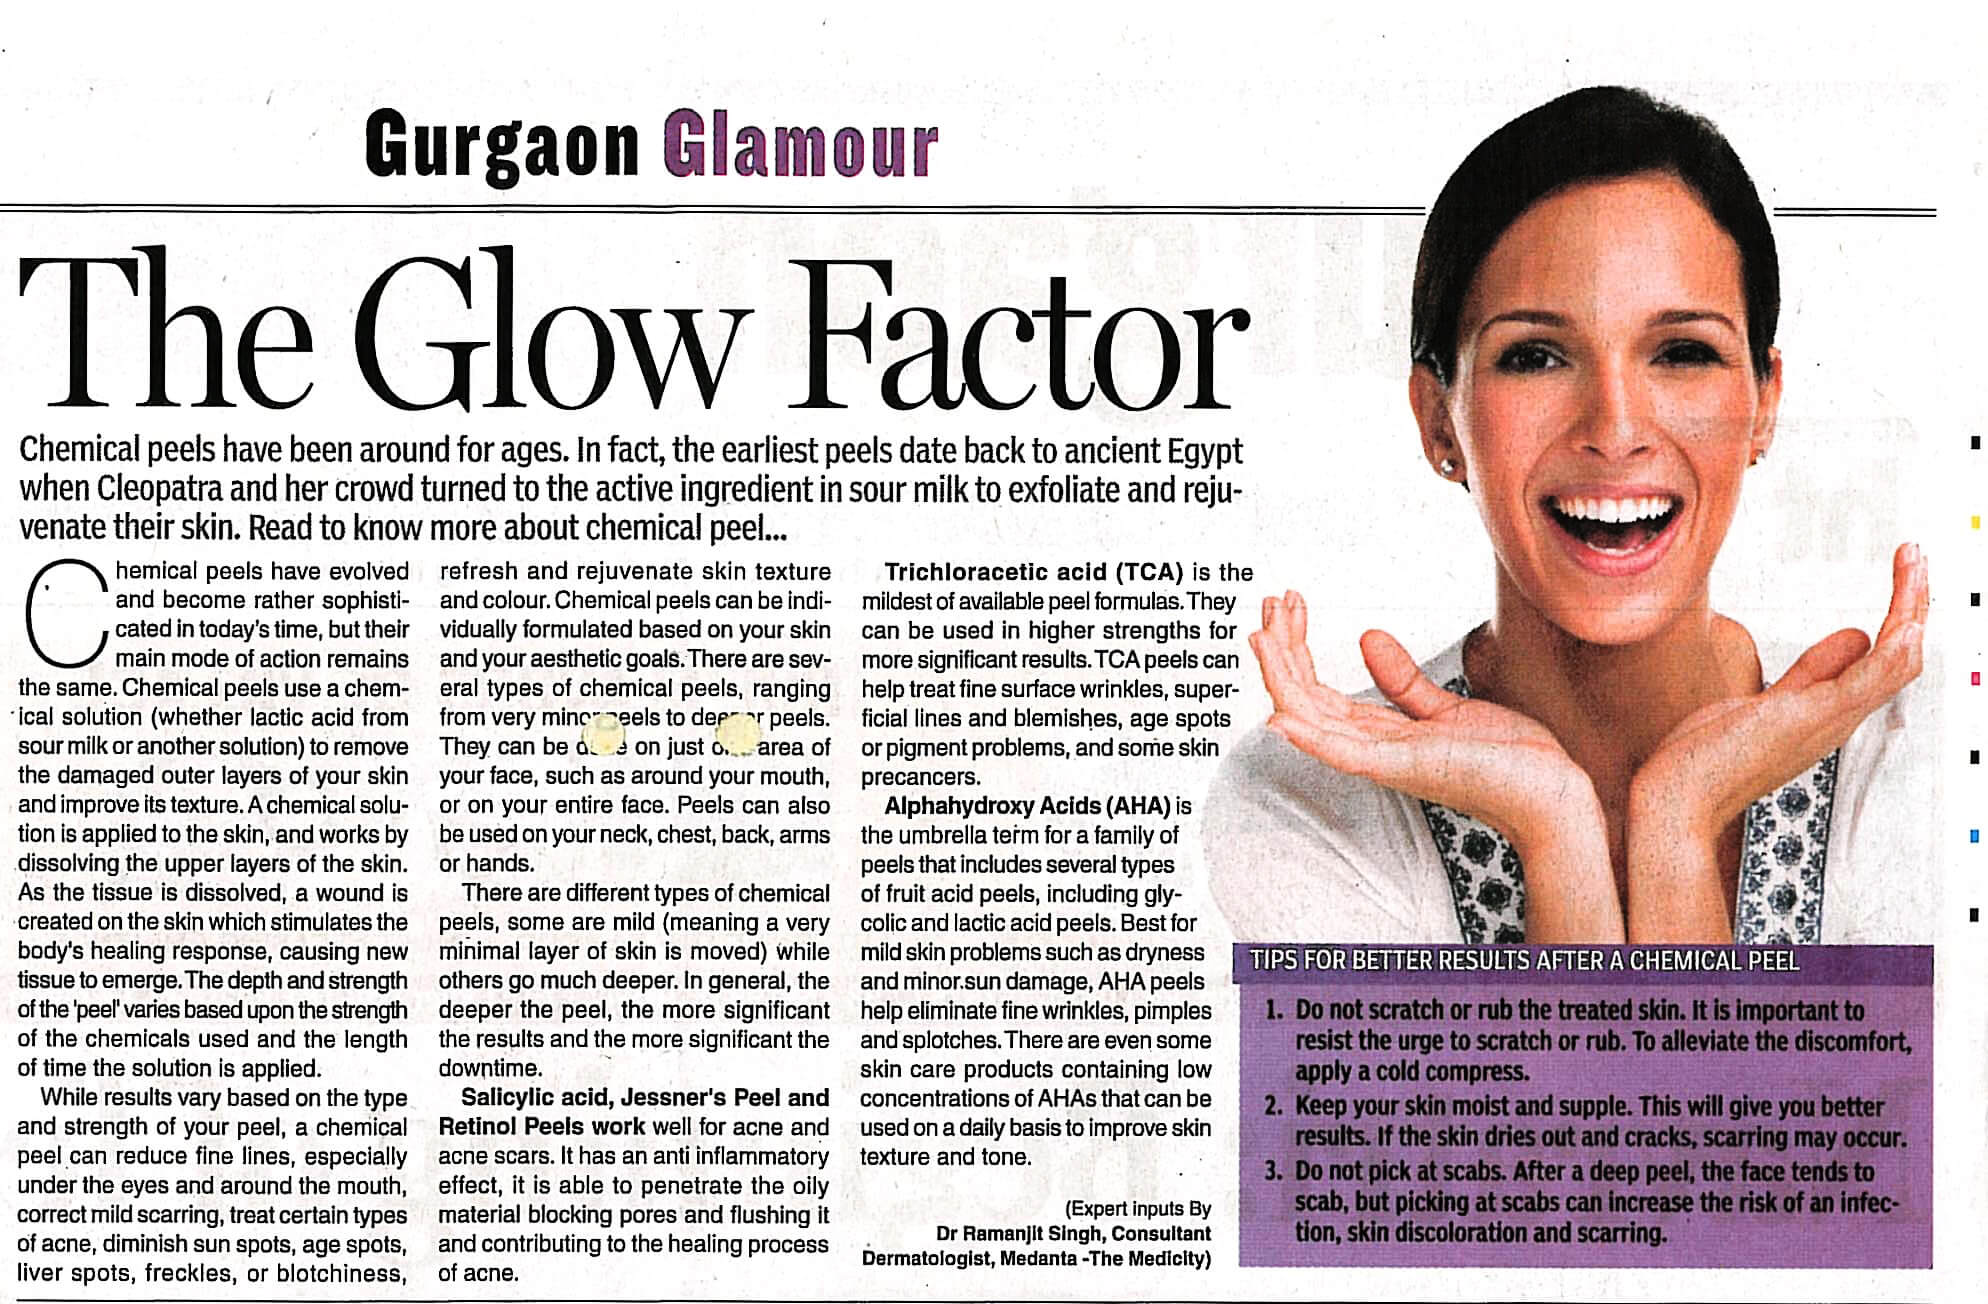 The Glow Factor